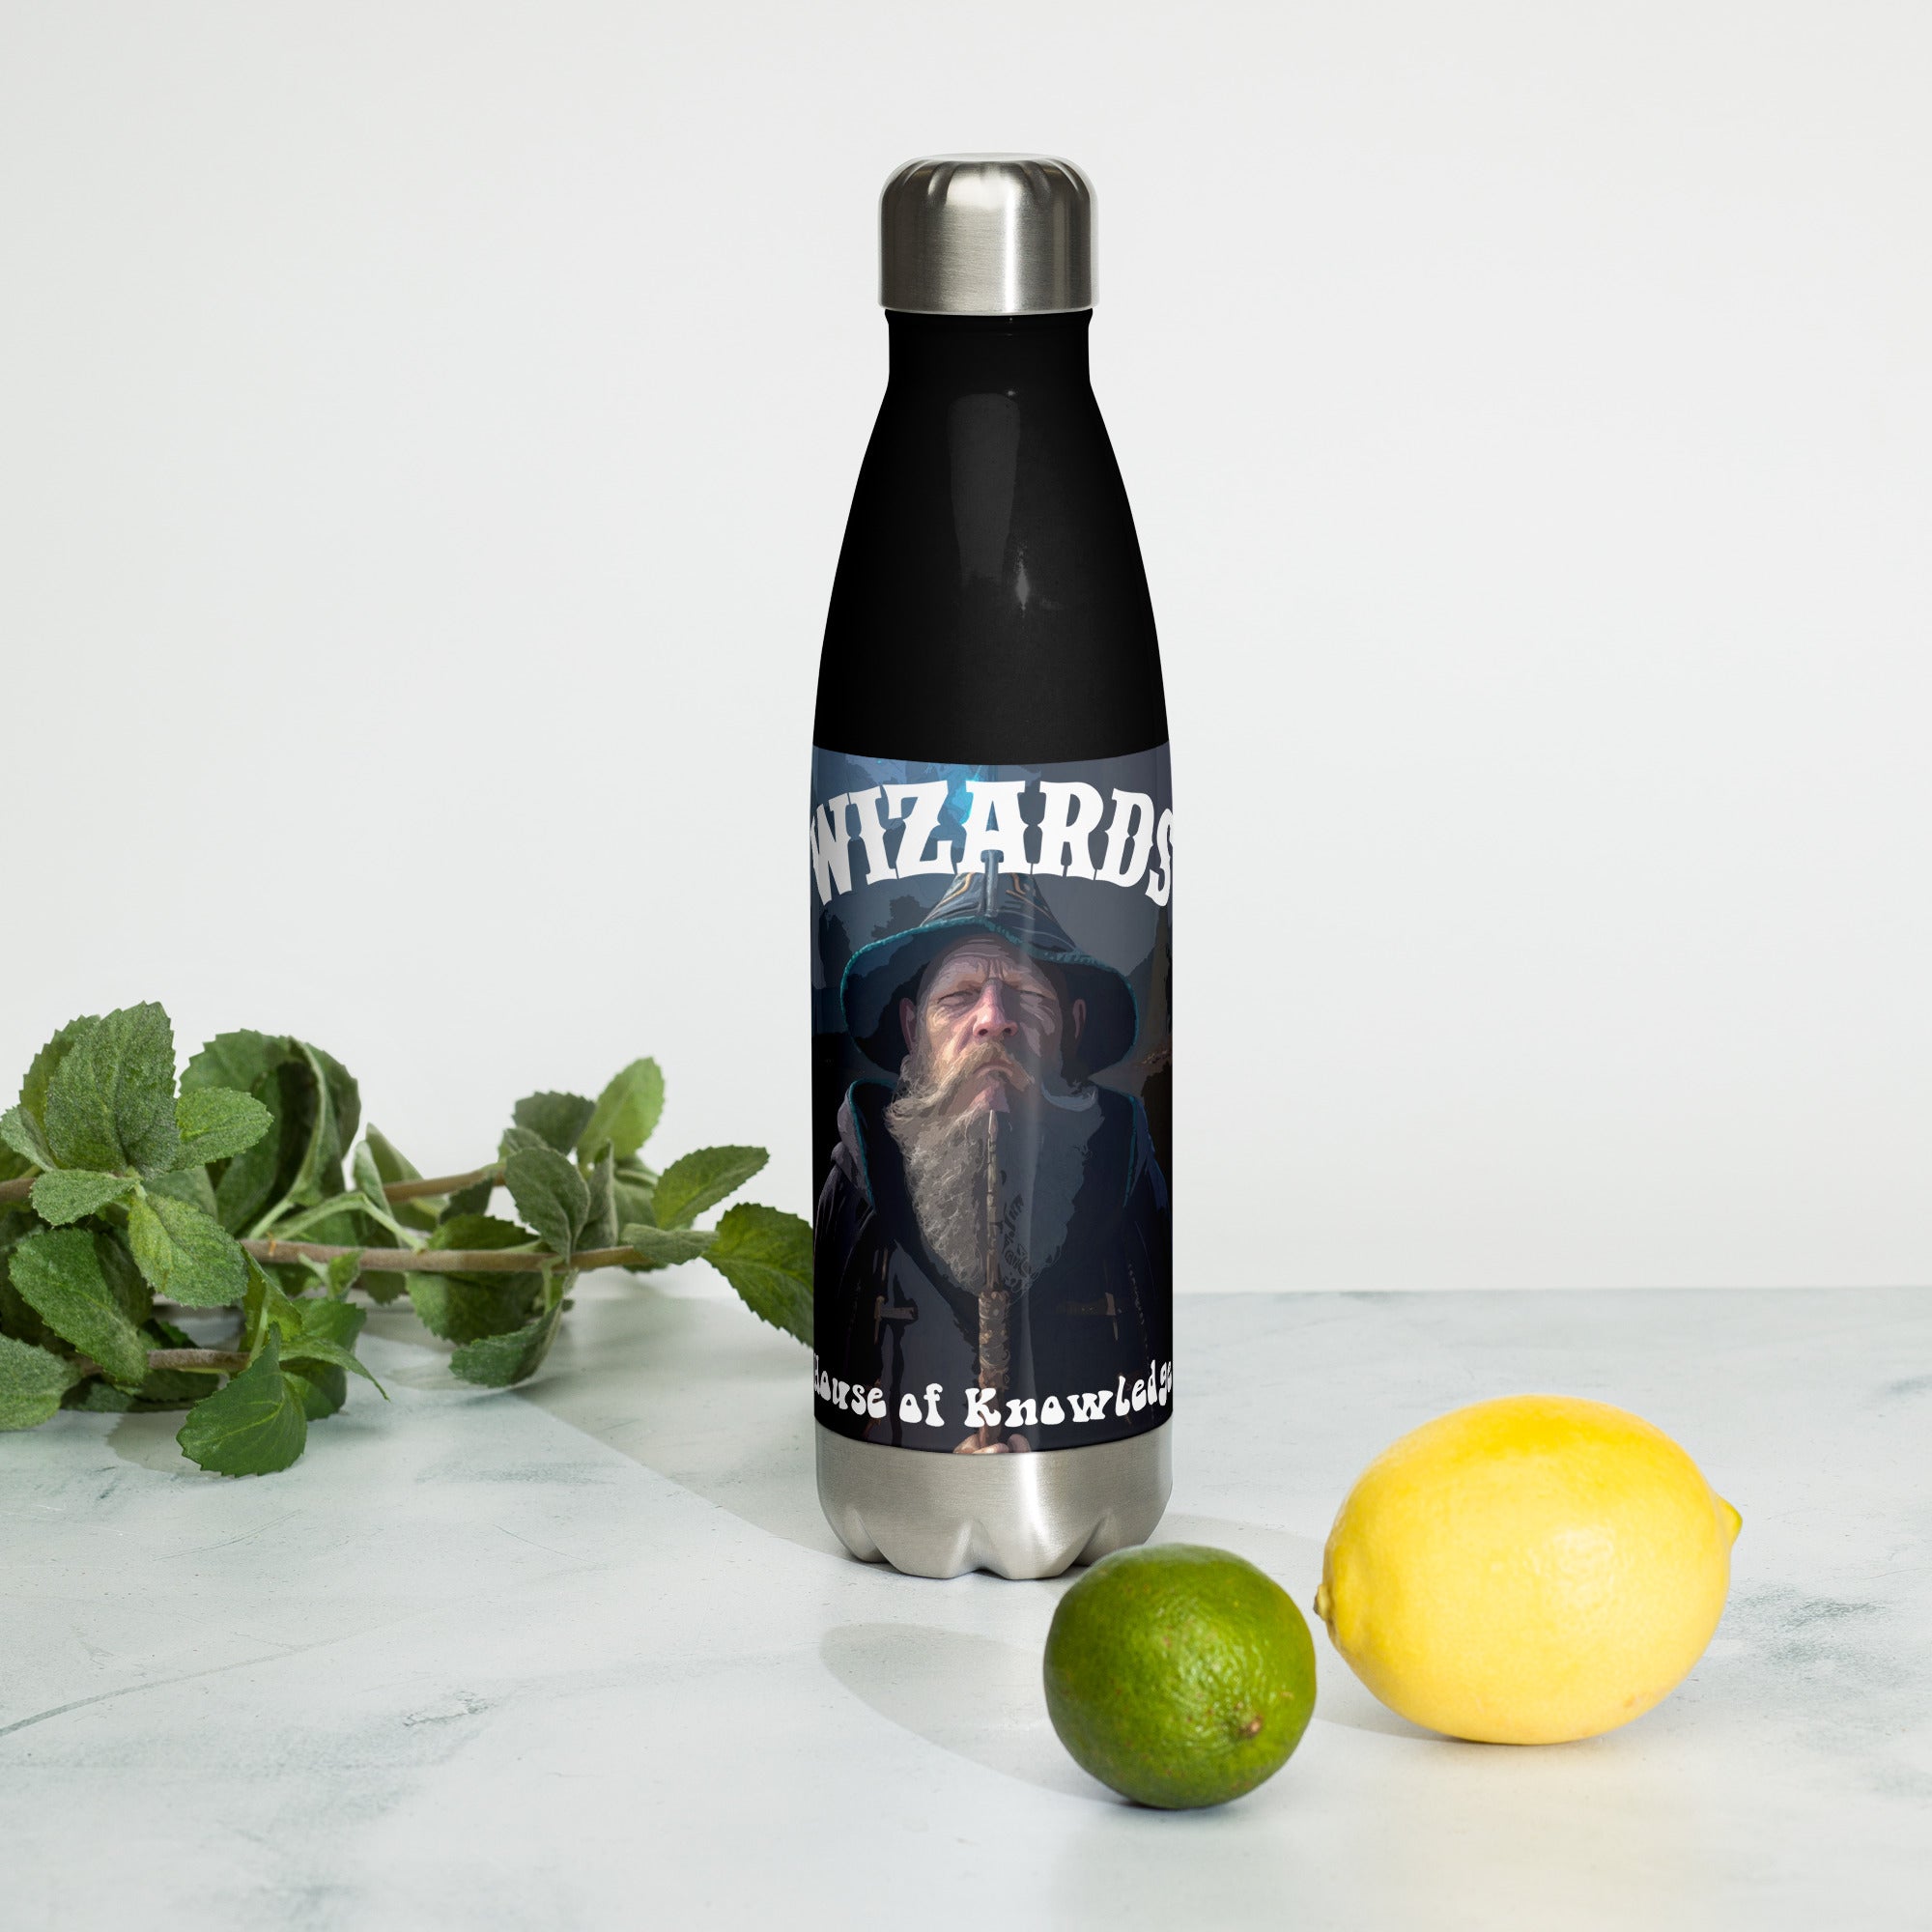 Wizards House of Knowledge Stainless Steel Water Bottle